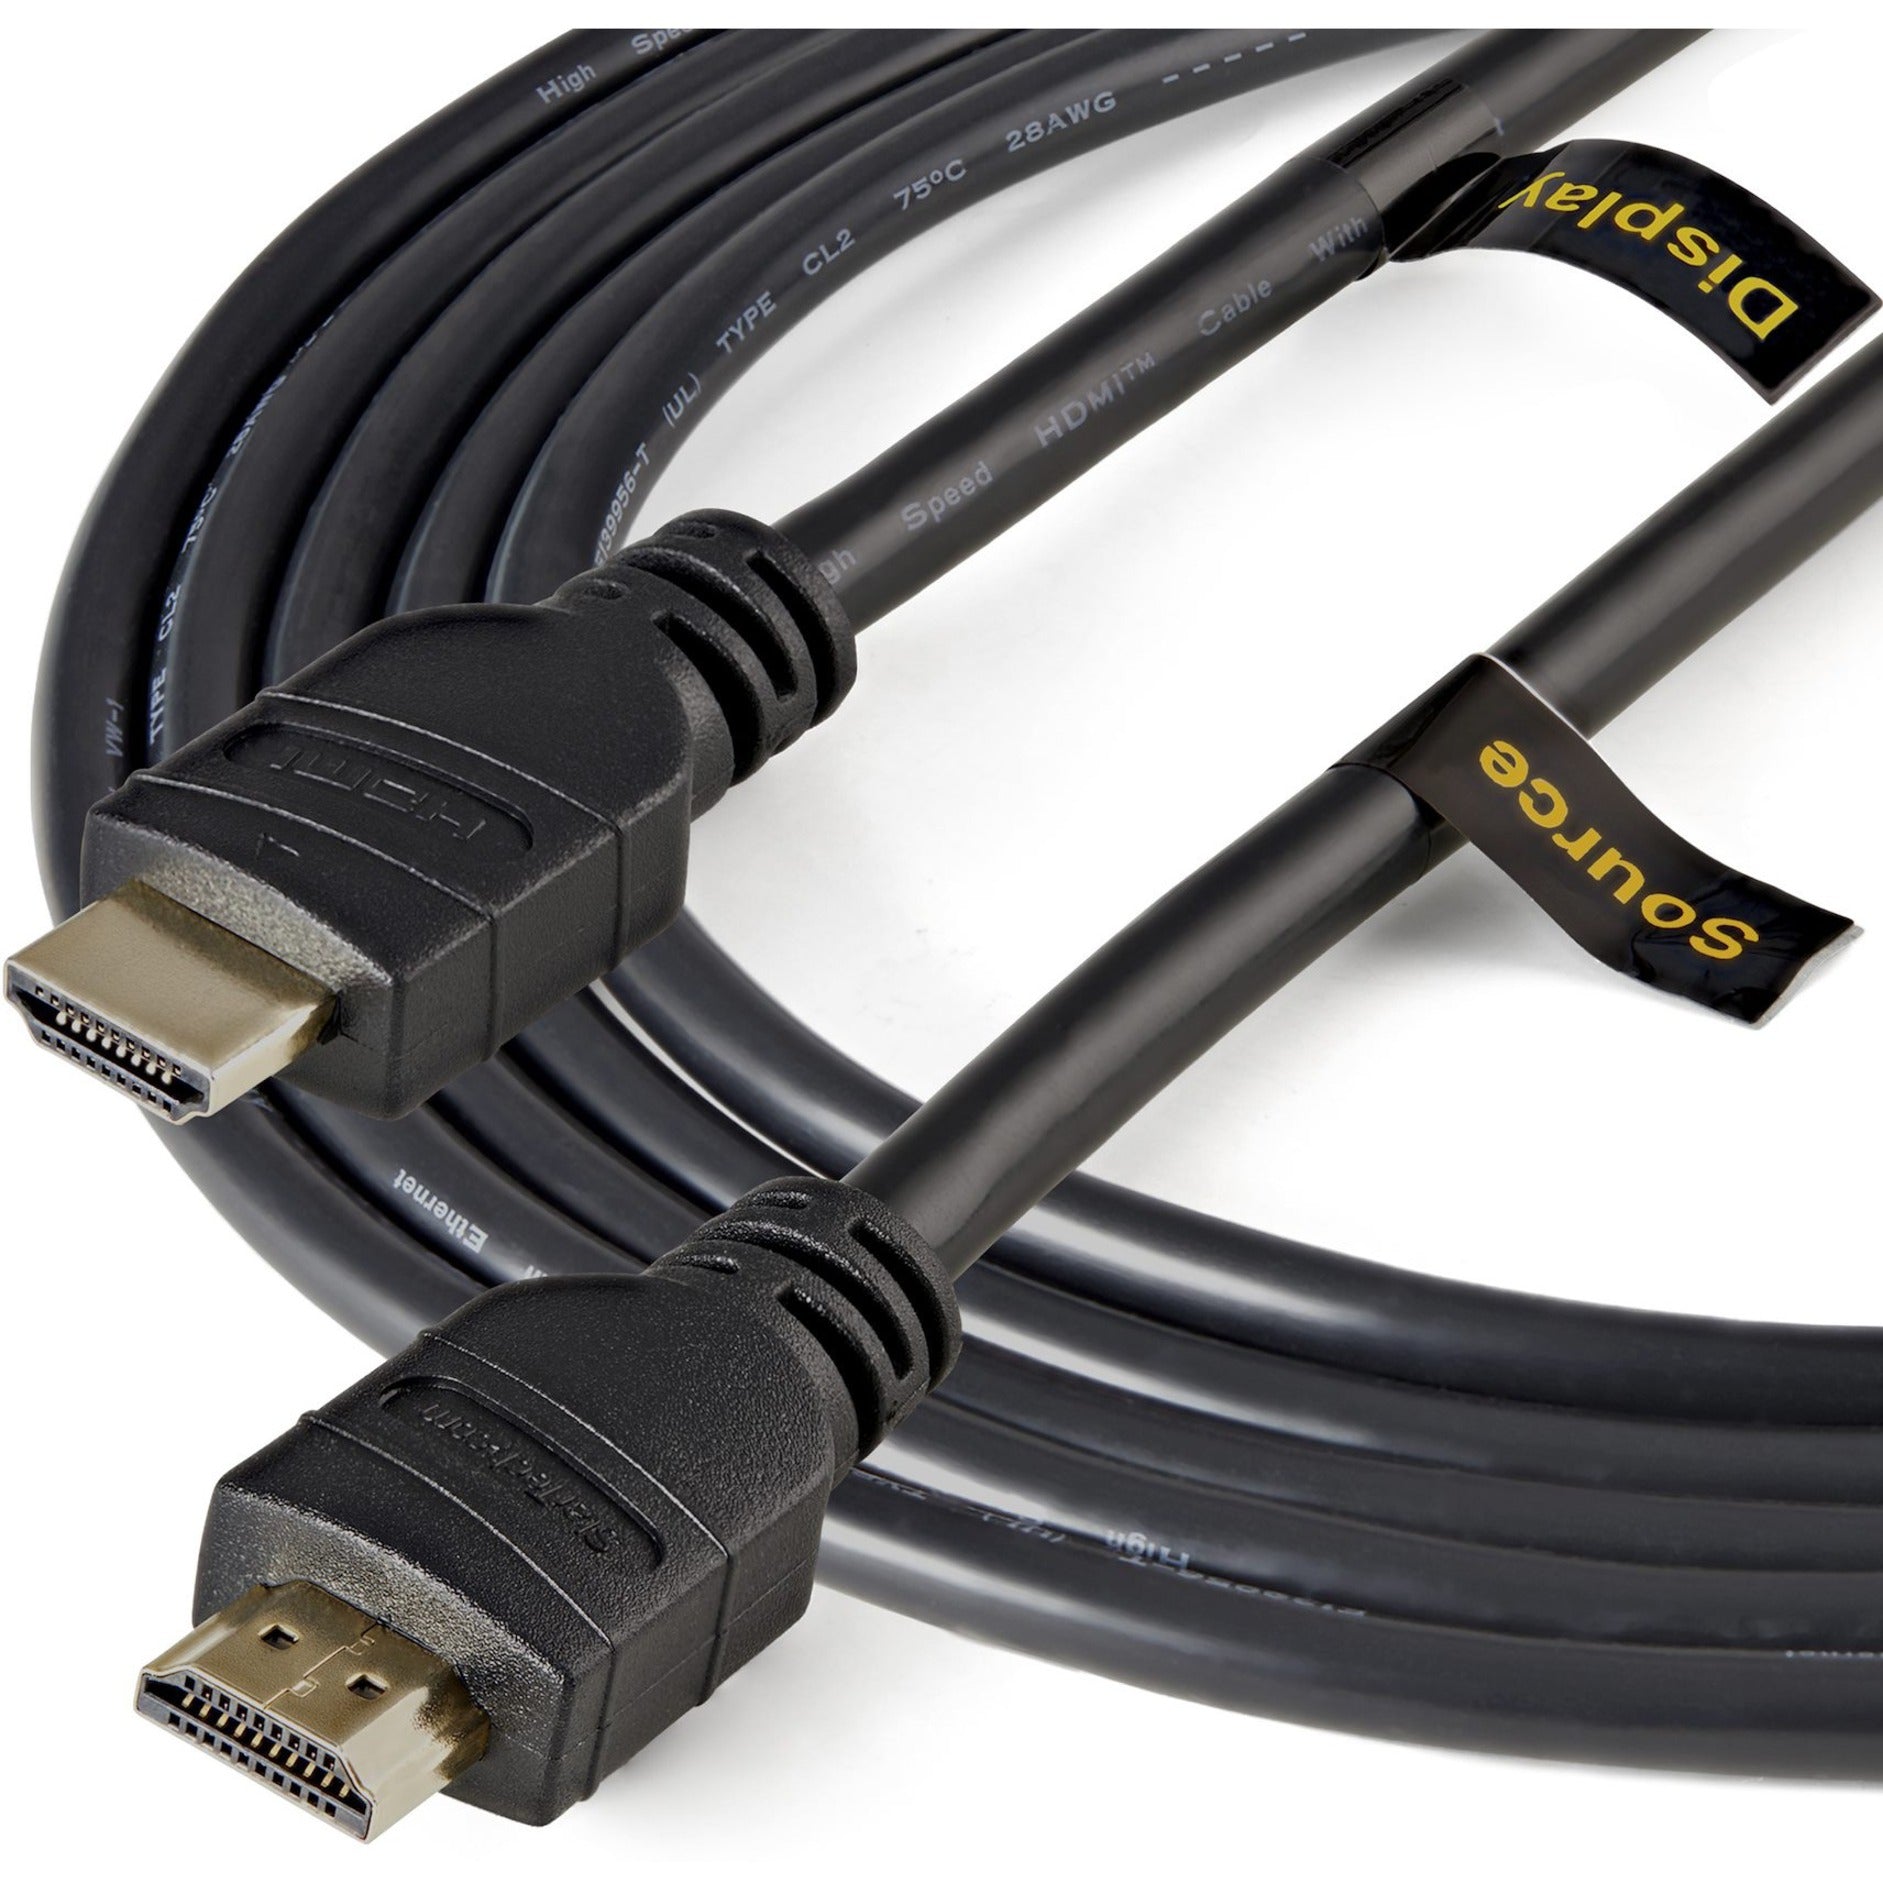 StarTech.com HDMM15MA 15m (50 ft) Active High Speed HDMI Cable - HDMI to HDMI - M/M, Flexible, Signal Booster, 1920 x 1080 Supported Resolution